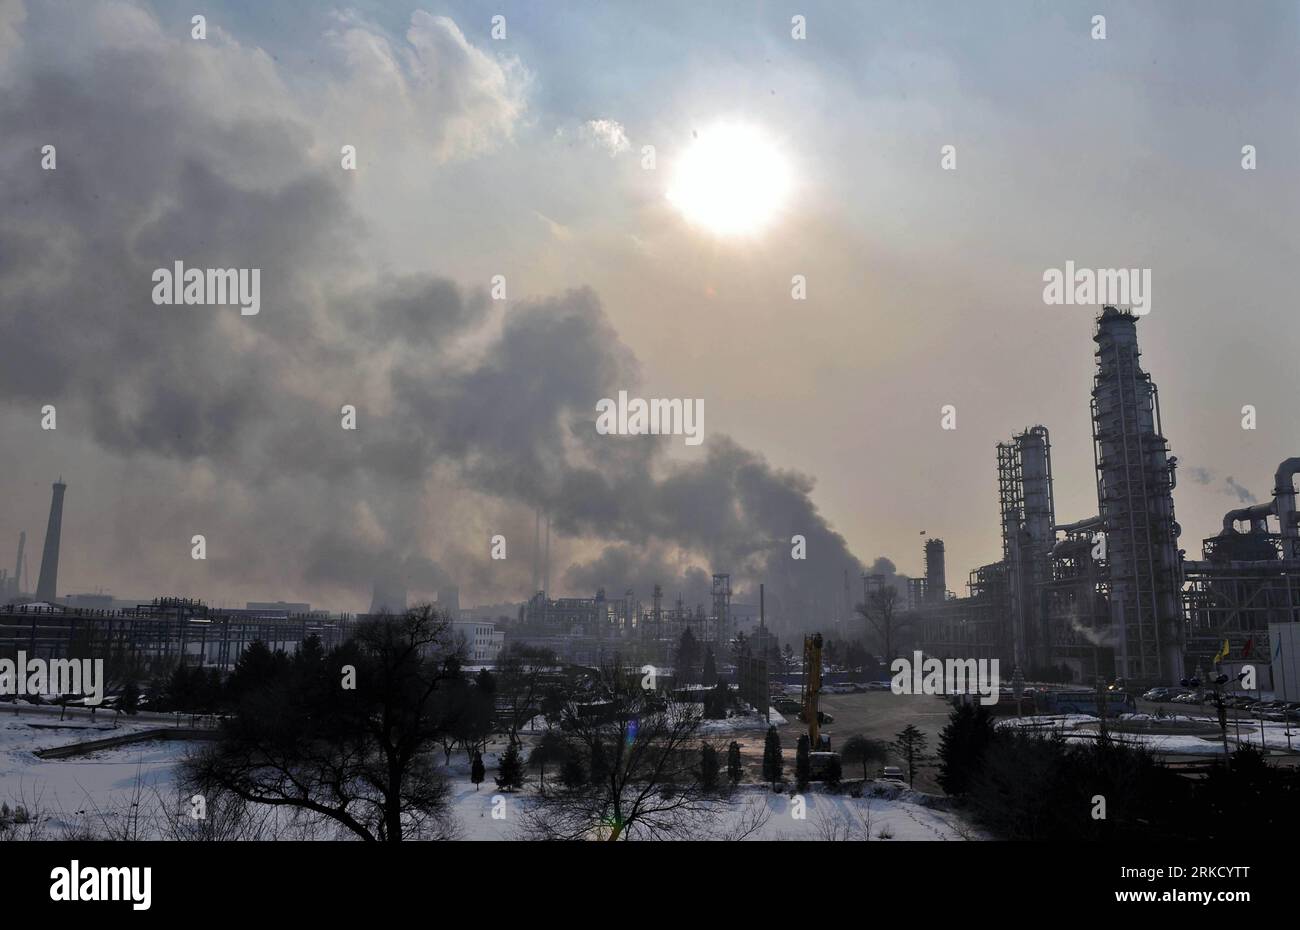 Bildnummer: 54830025  Datum: 19.01.2011  Copyright: imago/Xinhua FUSHUN, Jan. 19, 2011 (Xinhua) -- Smoke rises from the site where an explosion occurred at a refinery of Fushun Petrochemical Company in Fushun, northeast China s Liaoning Province, Jan. 19, 2011. Firefighters have brought the fire under control, eliminating the possibility of secondary explosions. No casualties have been reported so far. (Xinhua/Yao Jianfeng) (hdt) CHINA-FUSHUN-OIL REFINERY-EXPLOSION (CN) PUBLICATIONxNOTxINxCHN Wirtschaft Fabrik petrochemische Industrie Chemiefabrik Raffinerie Öl Ölraffinerie Explosion Unglück k Stock Photo